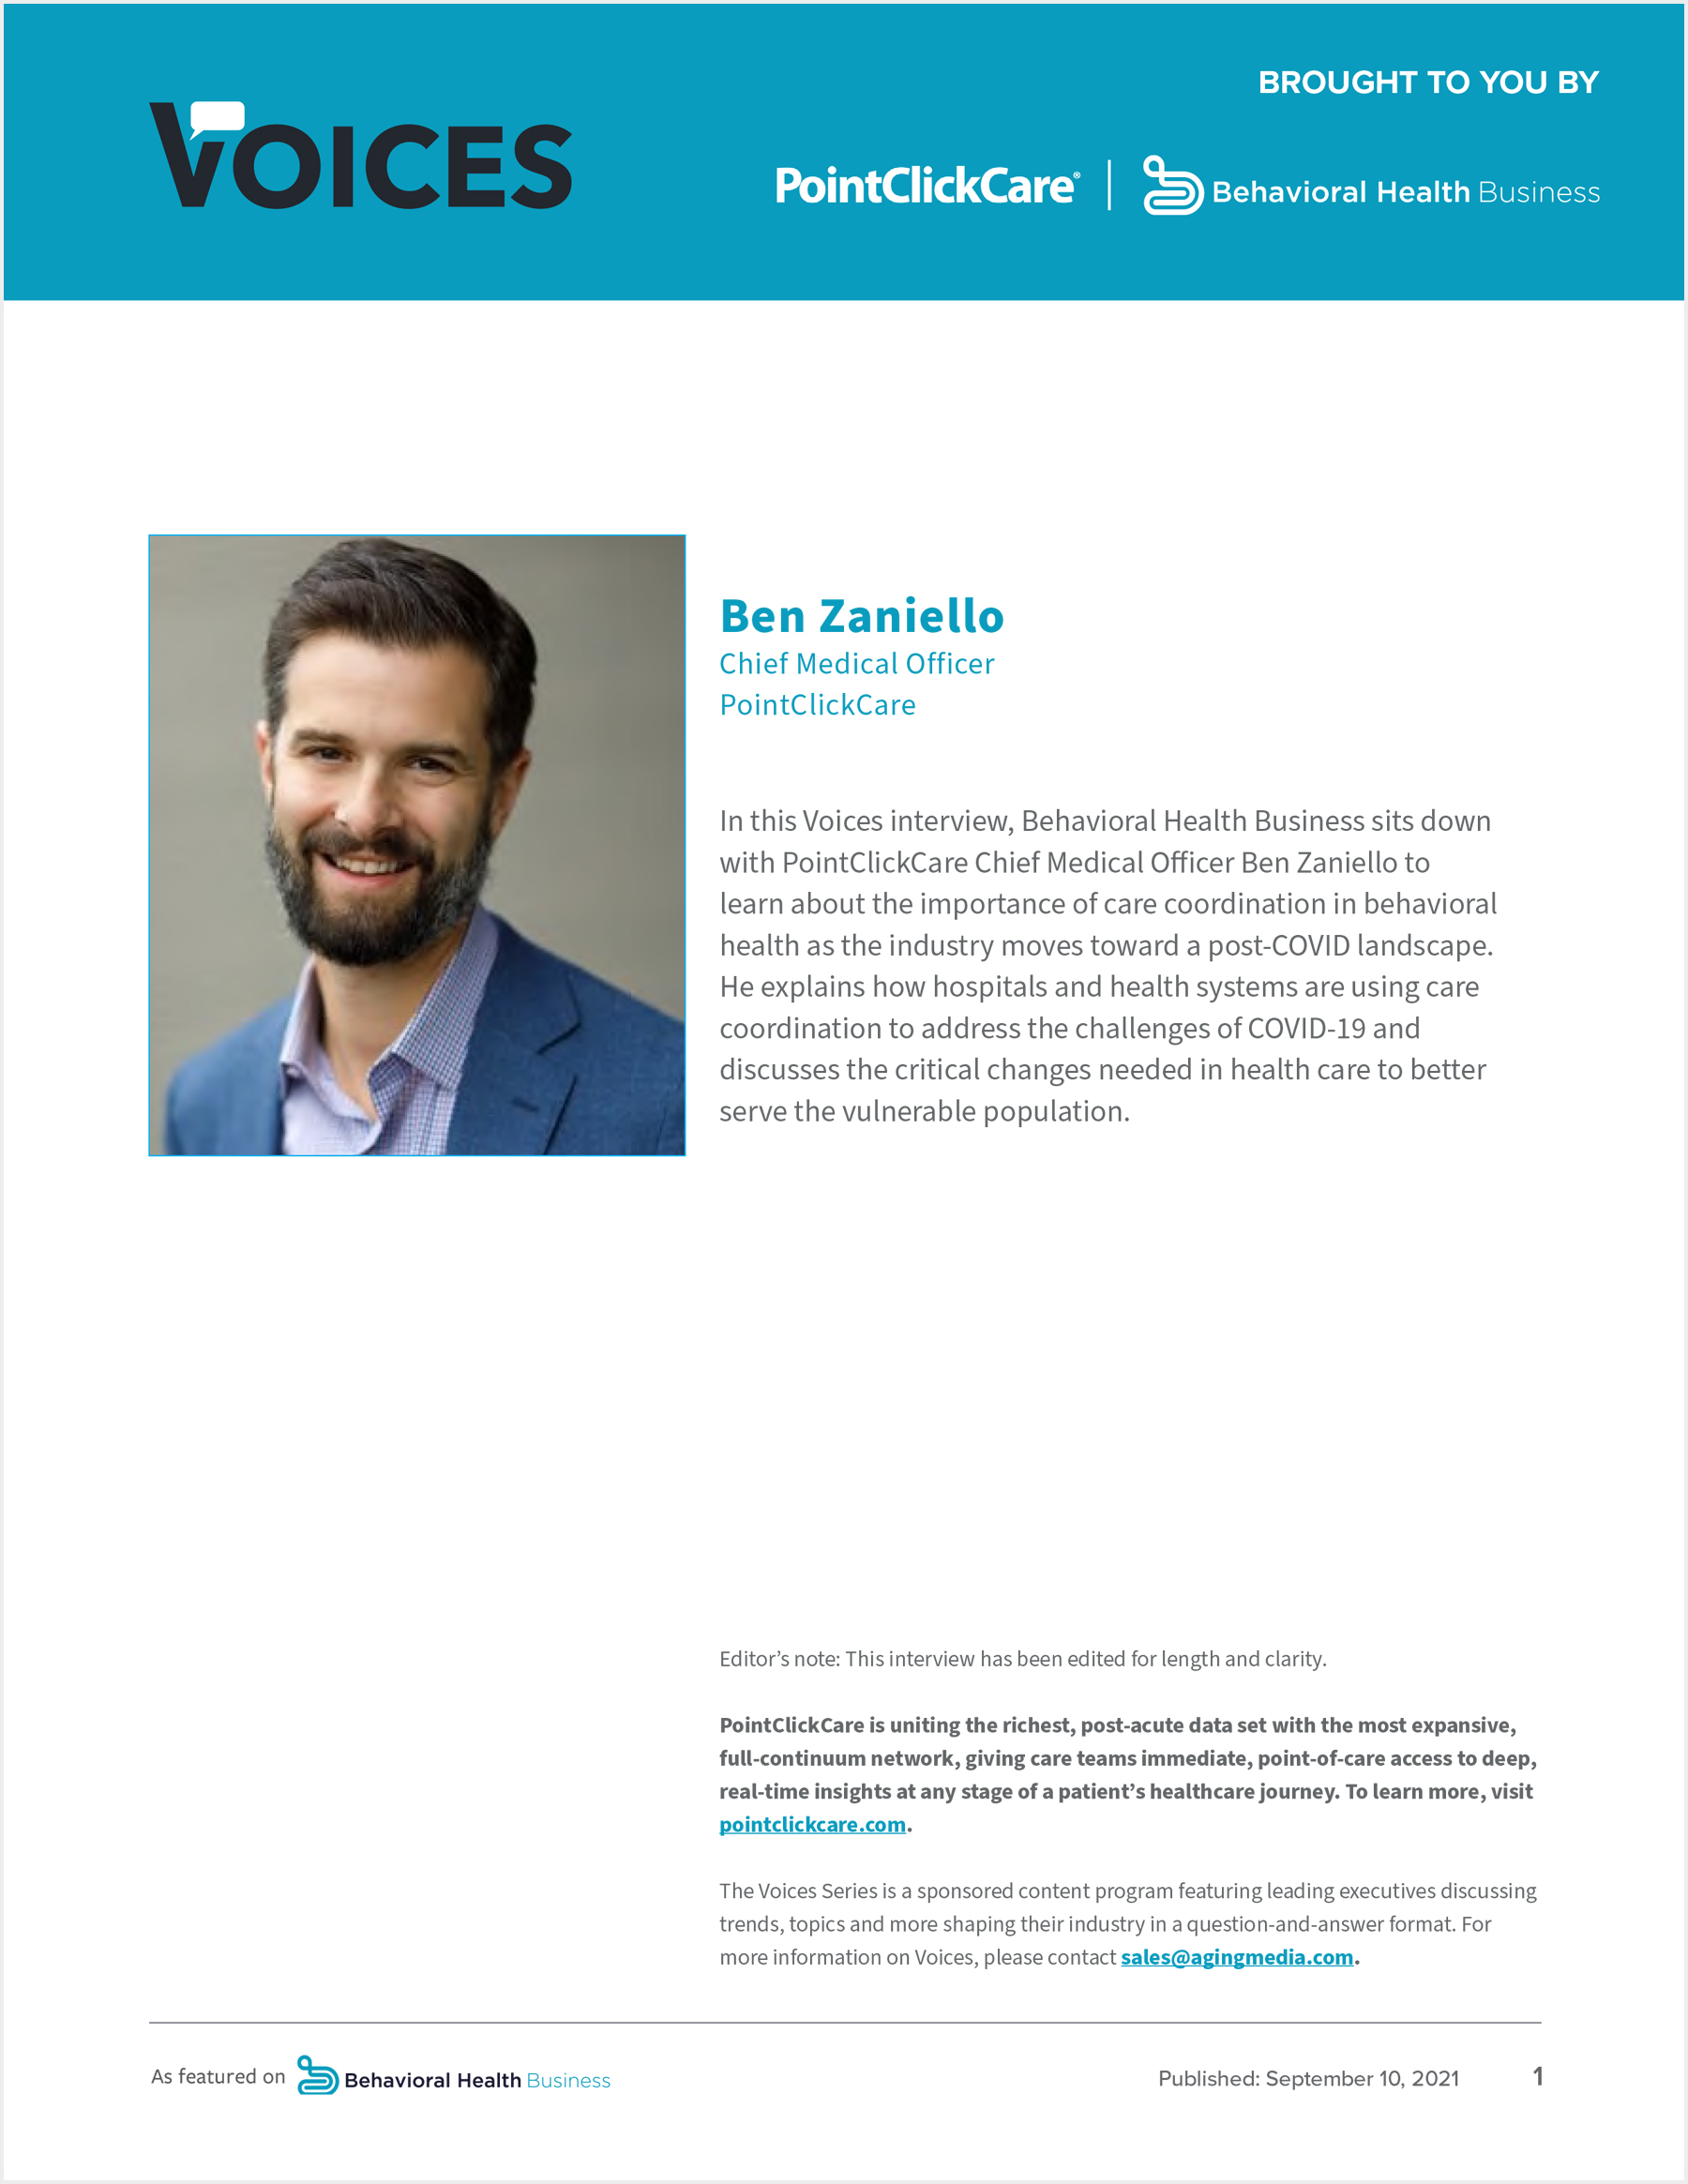 Behavioral Health Business and PointClickCare Voices Ben Zaniello article